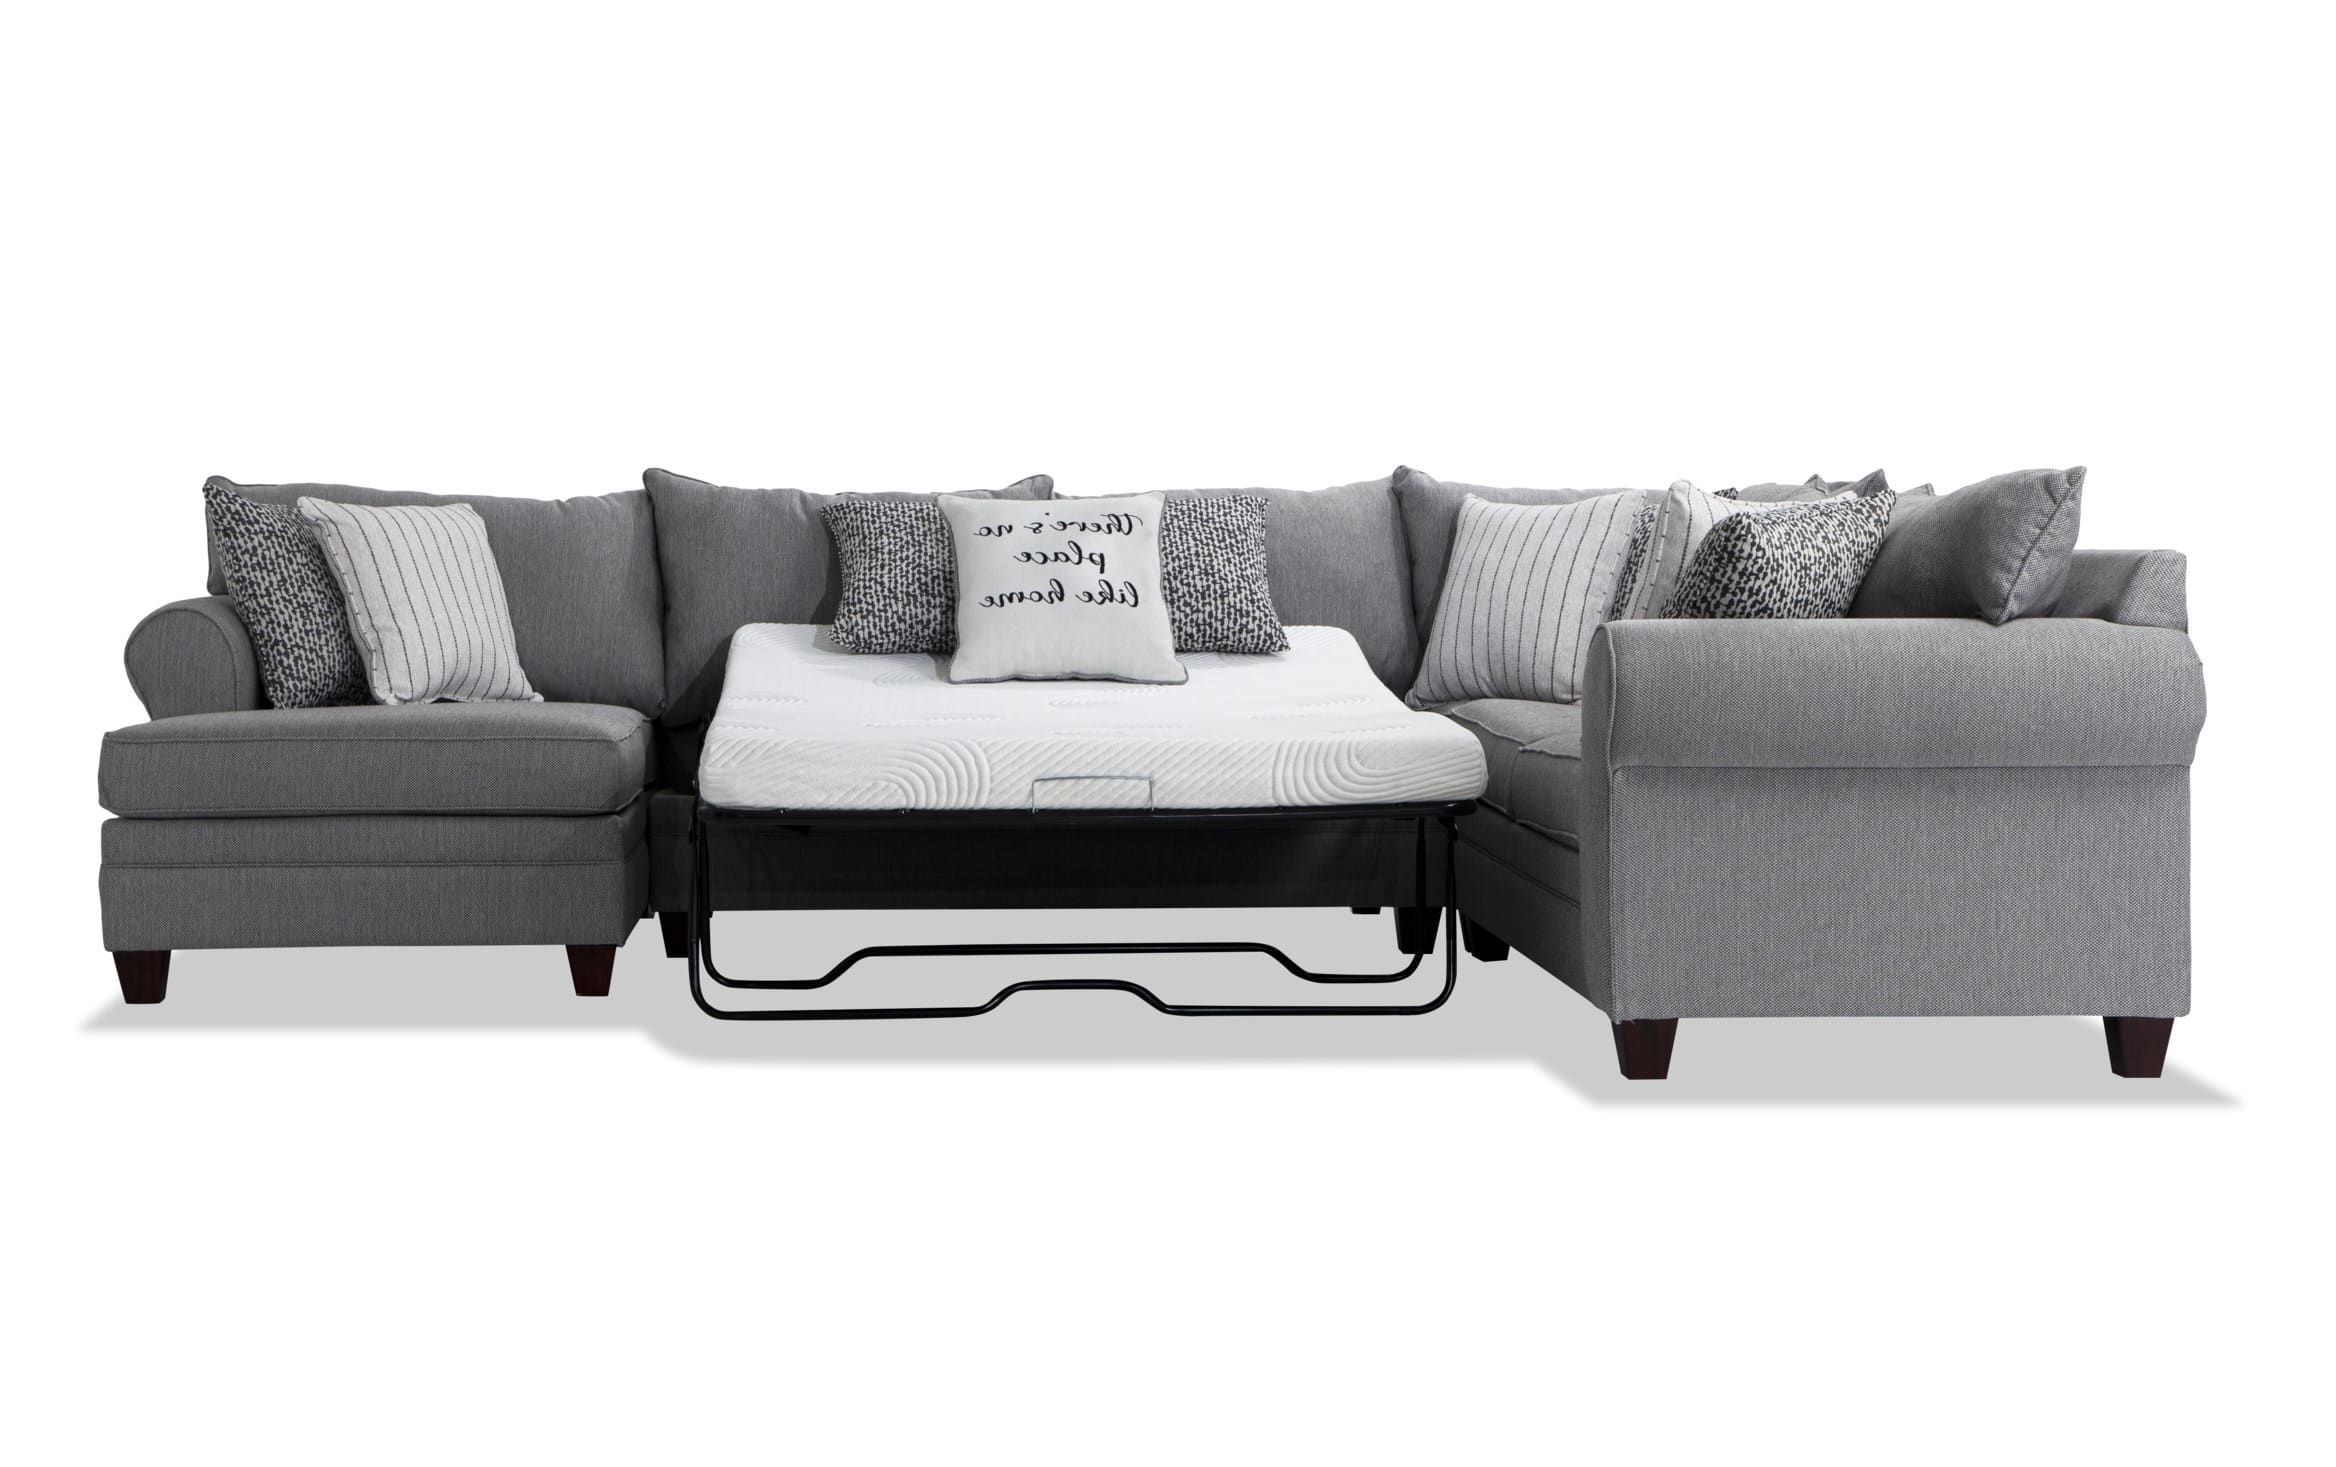 Laurel Gray 4 Piece Bob O Pedic Left Arm Facing Sleeper Sectional For Left Or Right Facing Sleeper Sectionals (View 13 of 20)